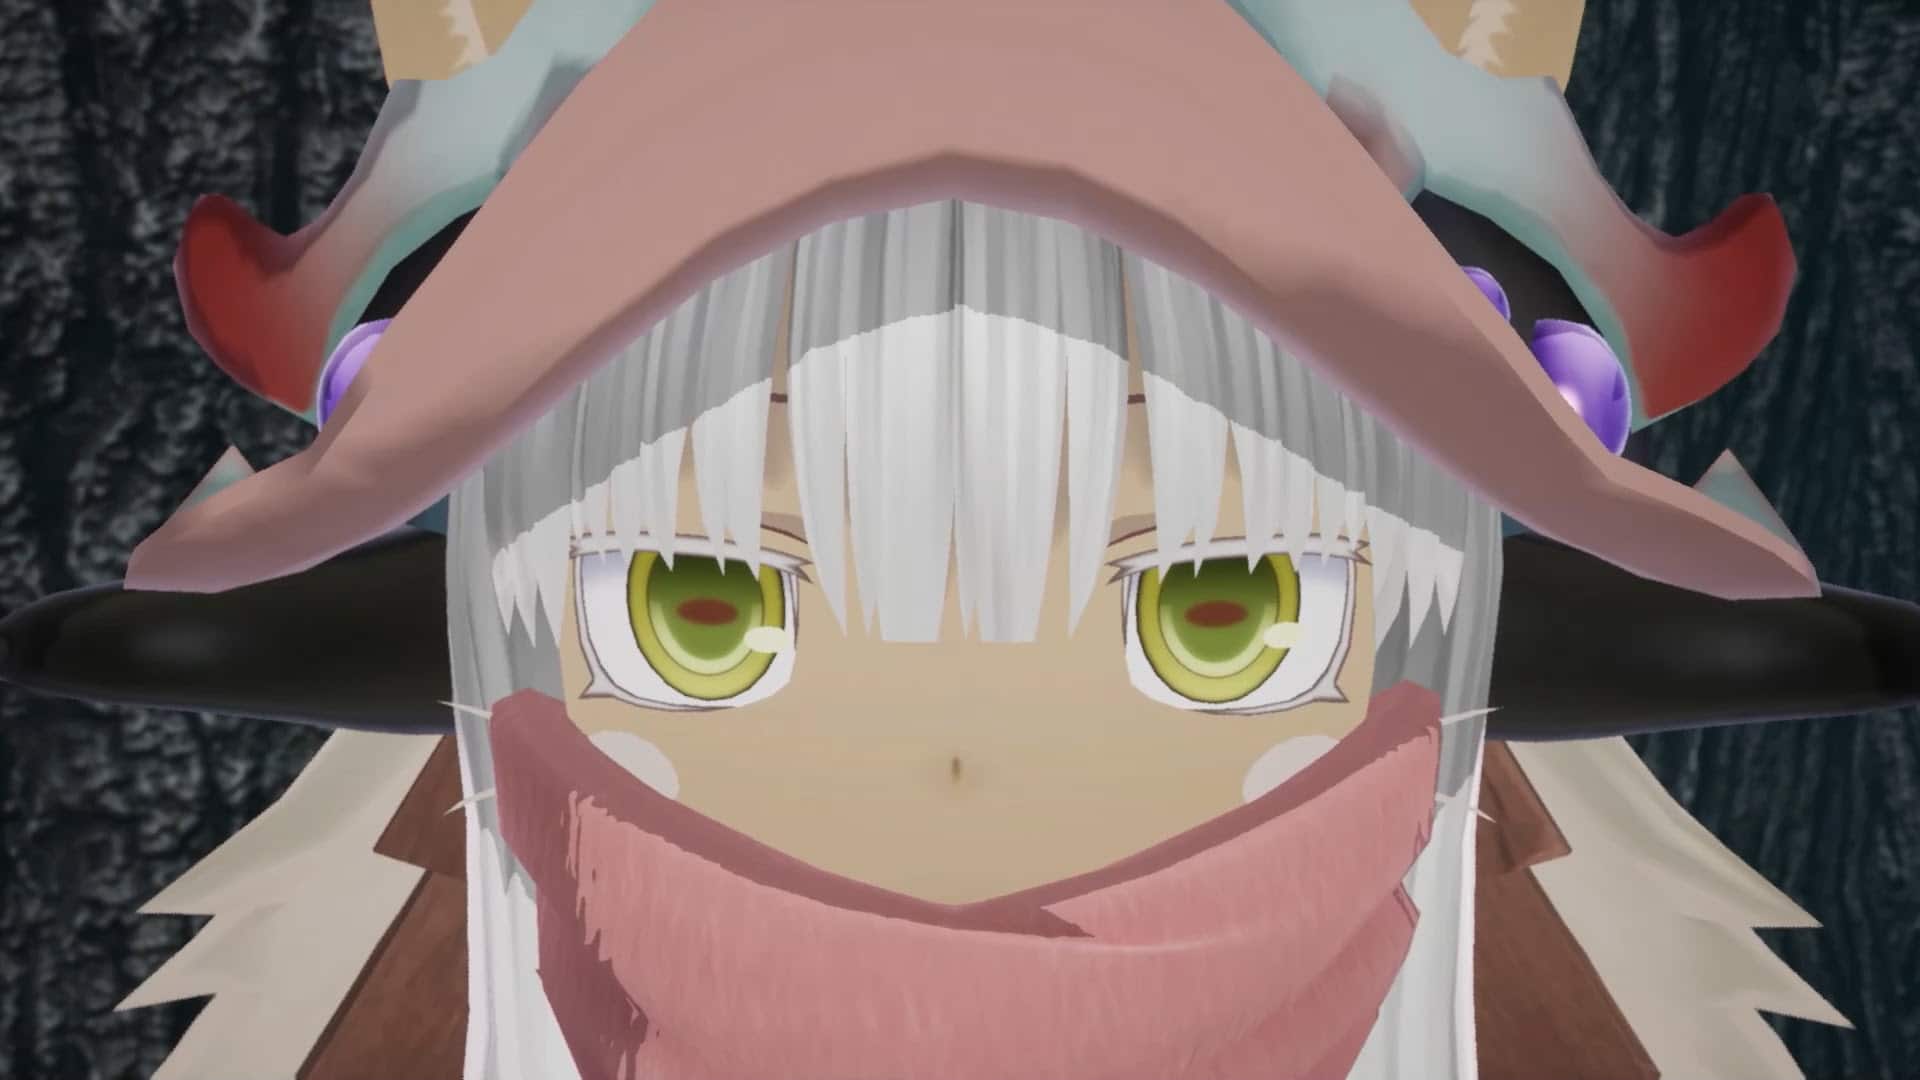 Made in Abyss: Binary Star Falling into Darkness launches in fall